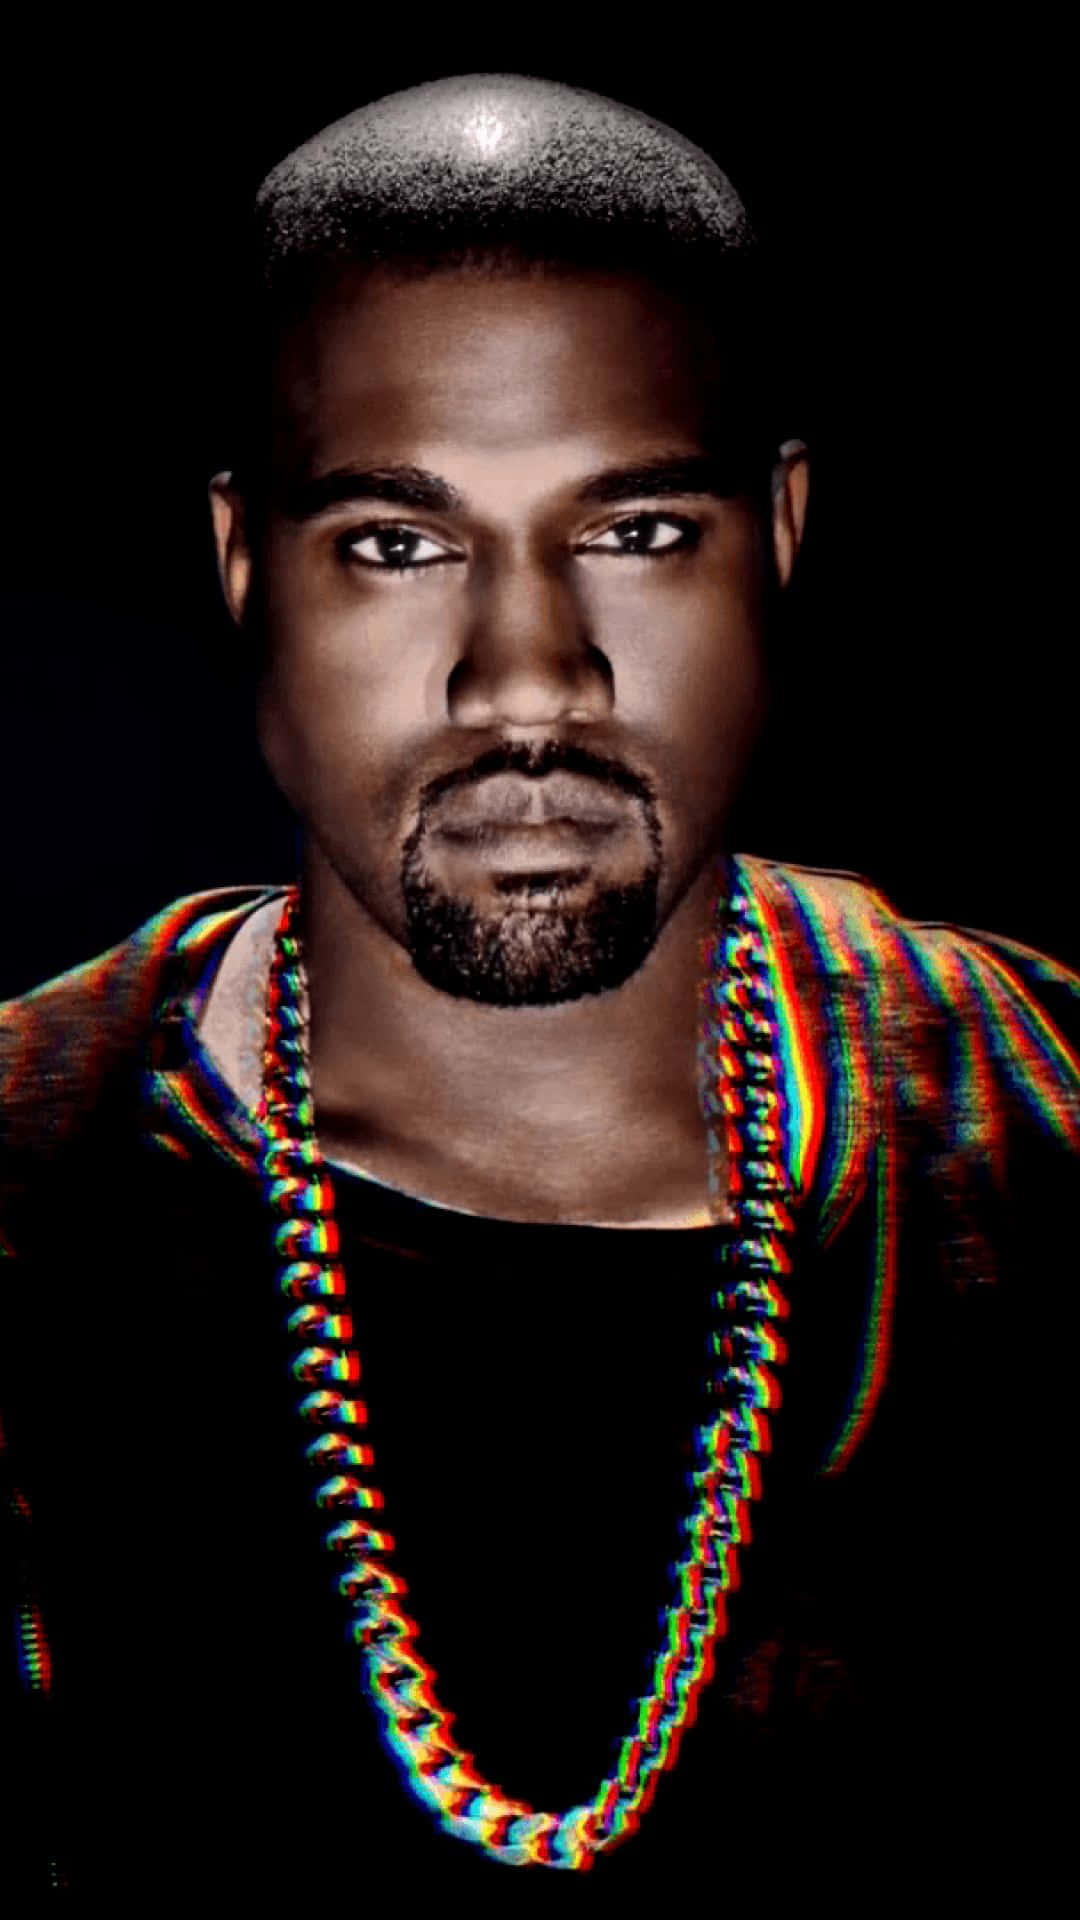 Embrace The Power of Technology With Kanye's IPhone Wallpaper